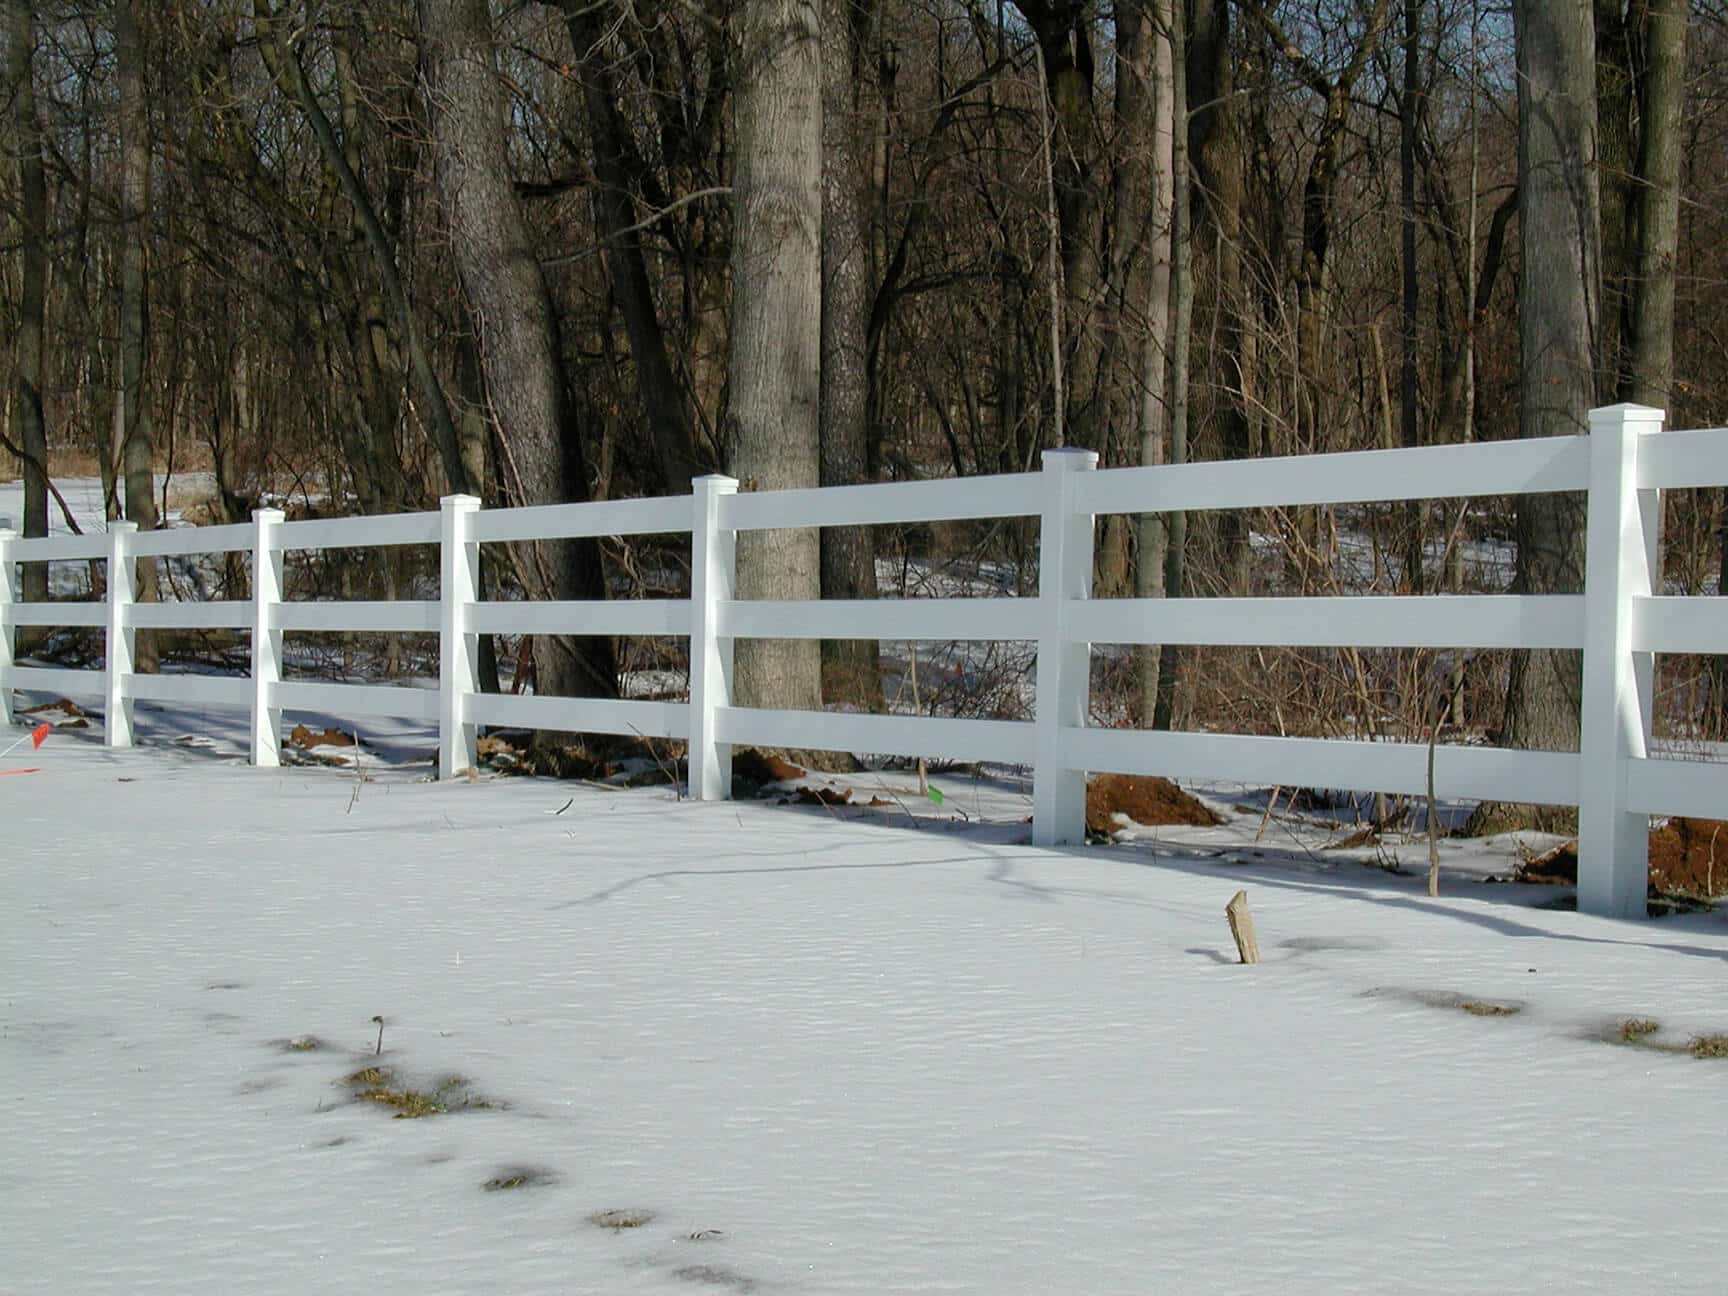 Rail fence for horse ranches around Indianapolis